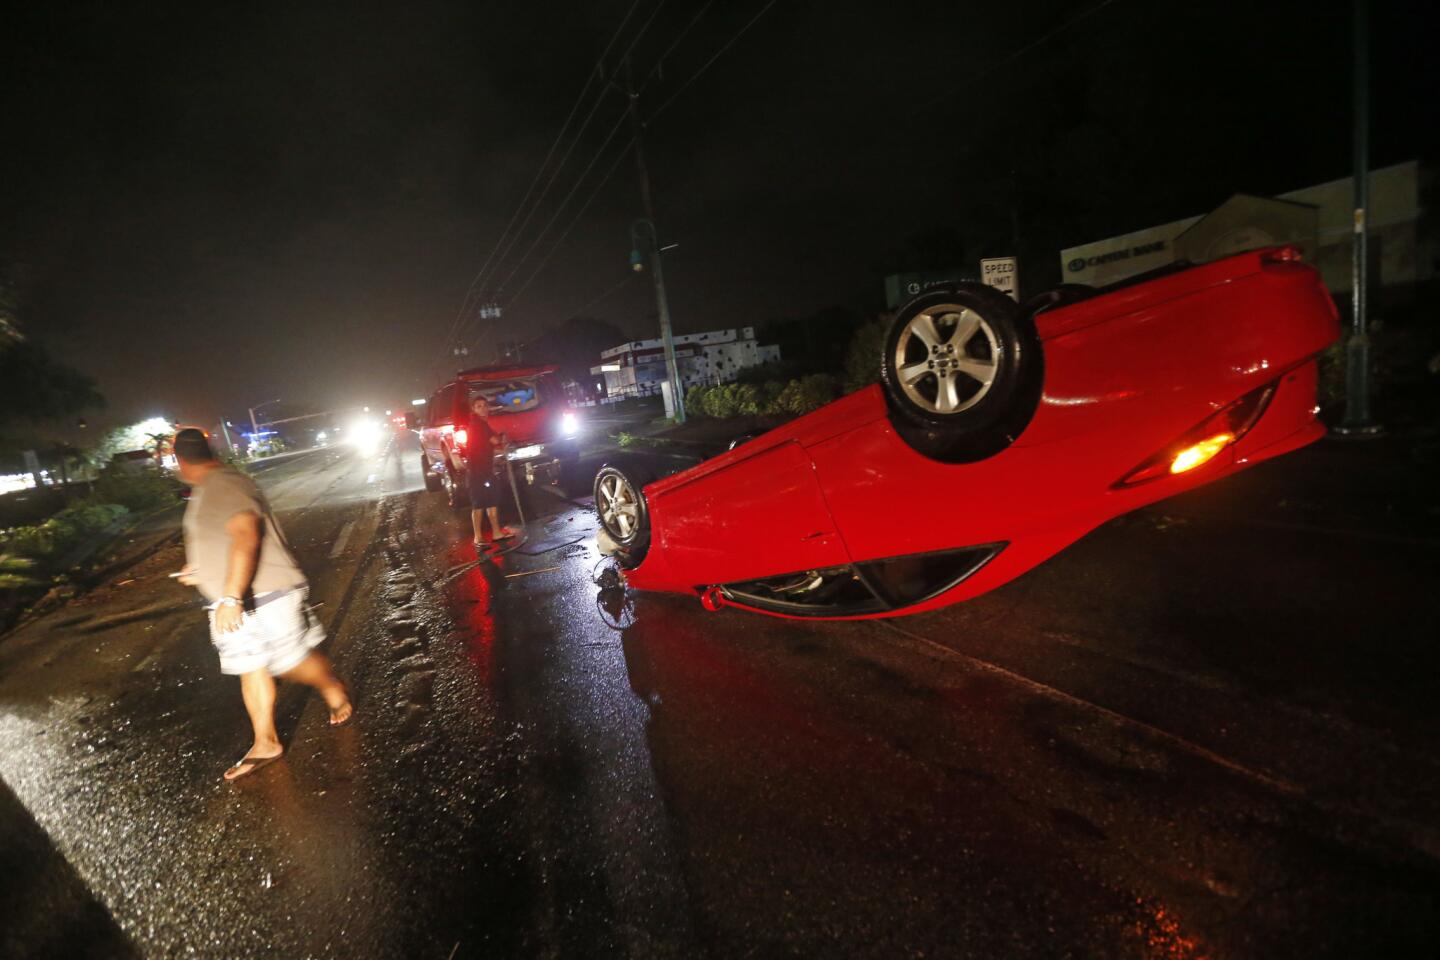 People tend to a car that flipped over on Cape Coral Parkway during Hurricane Irma, in Cape Coral, Fla., on Sept. 10, 2017.